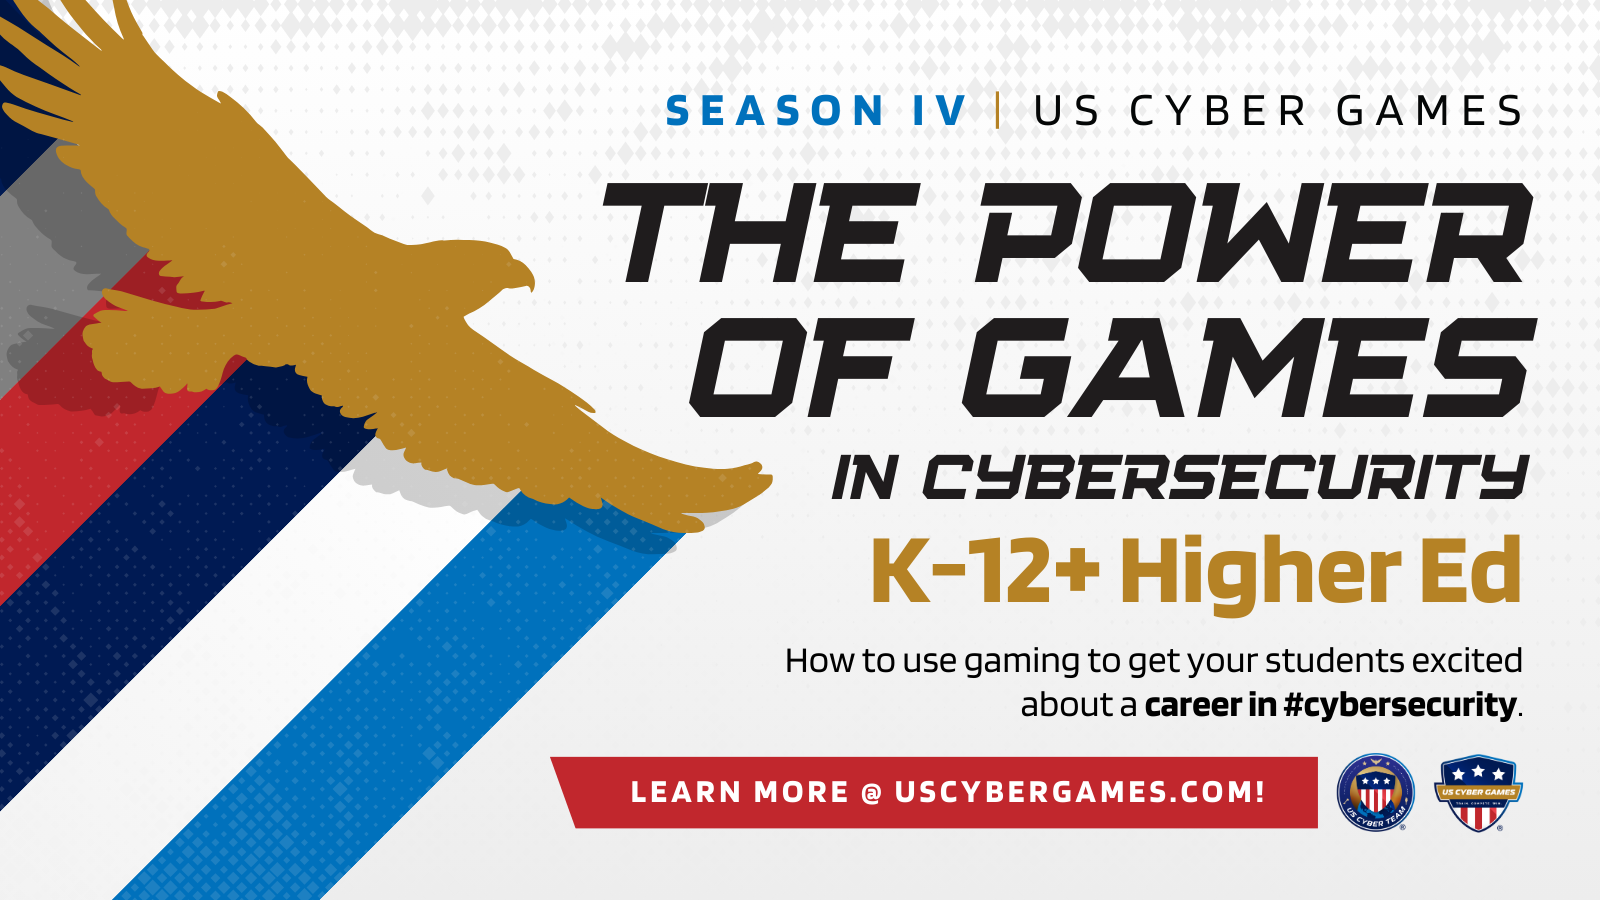 POWER OF GAMES IN CYBERSECURITY